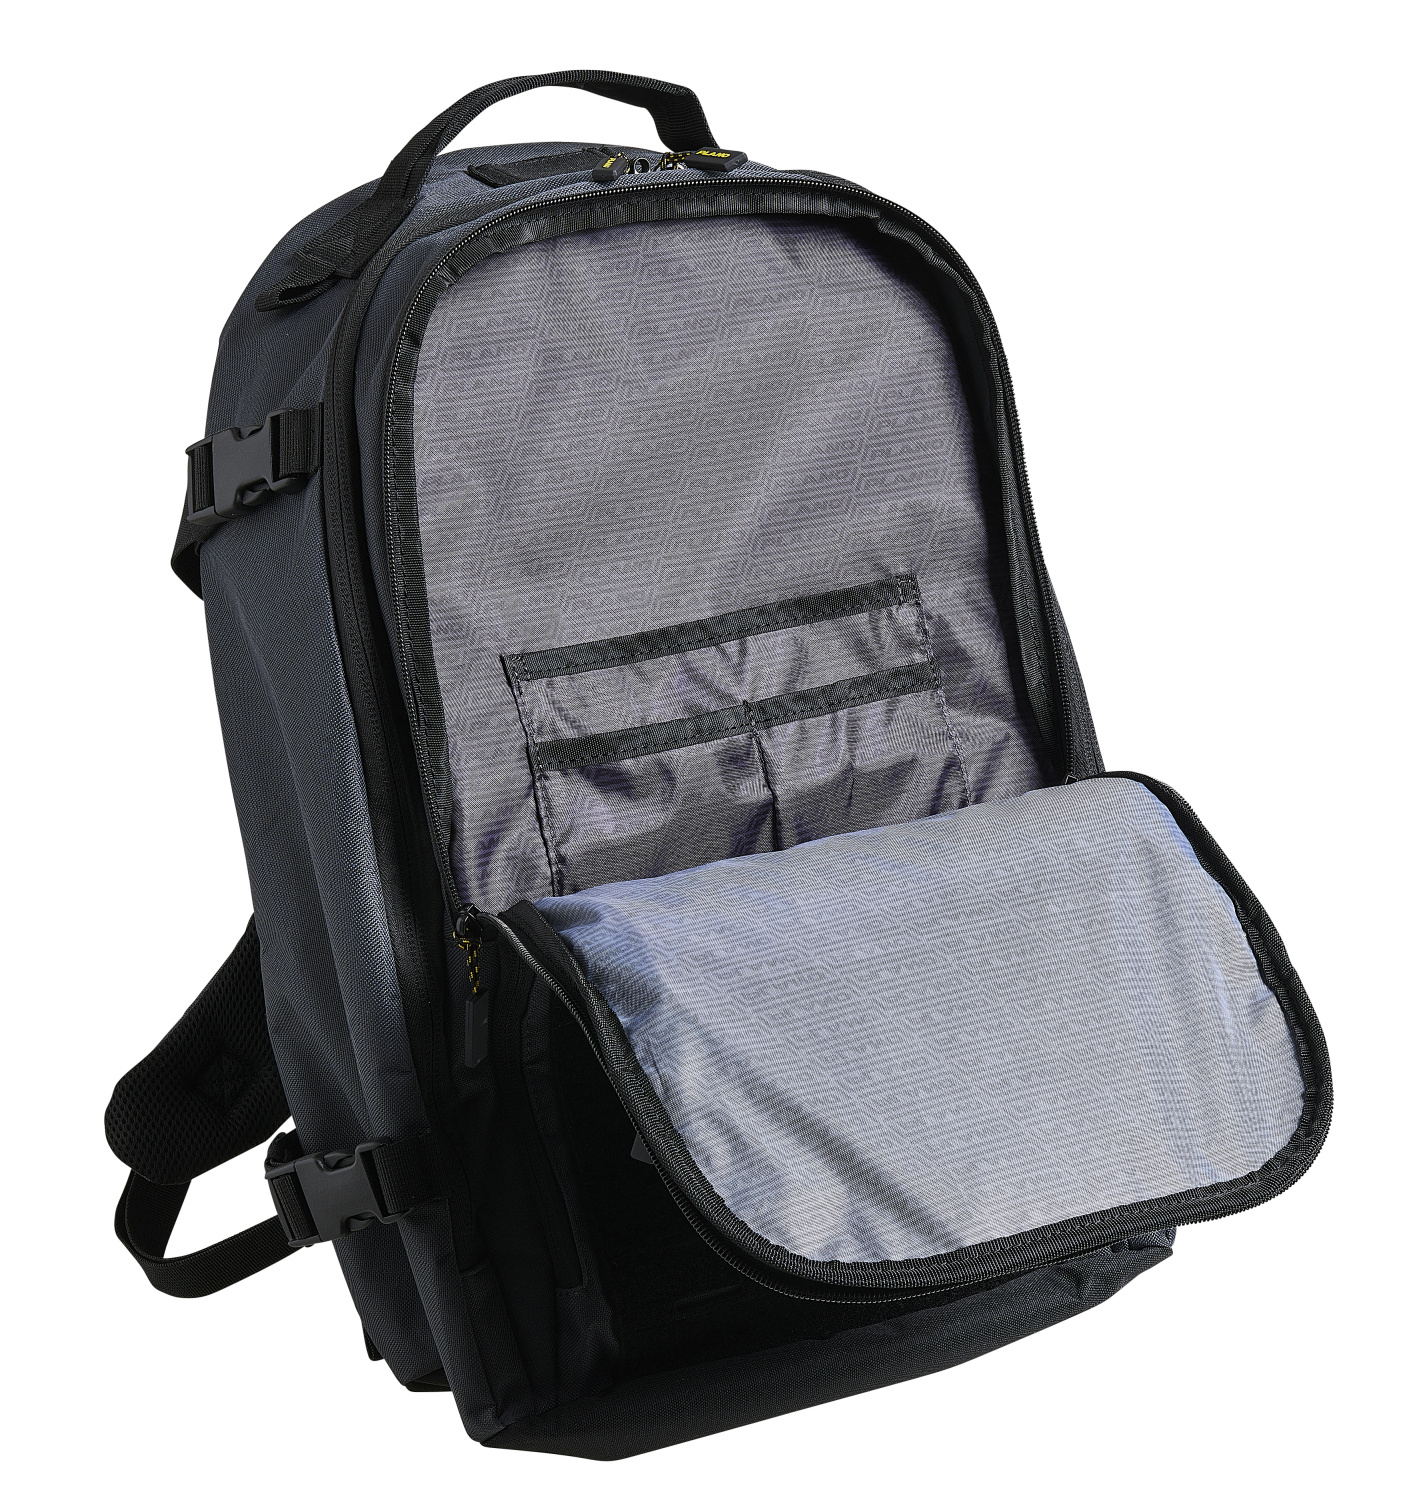 Plano Tactical Backpack